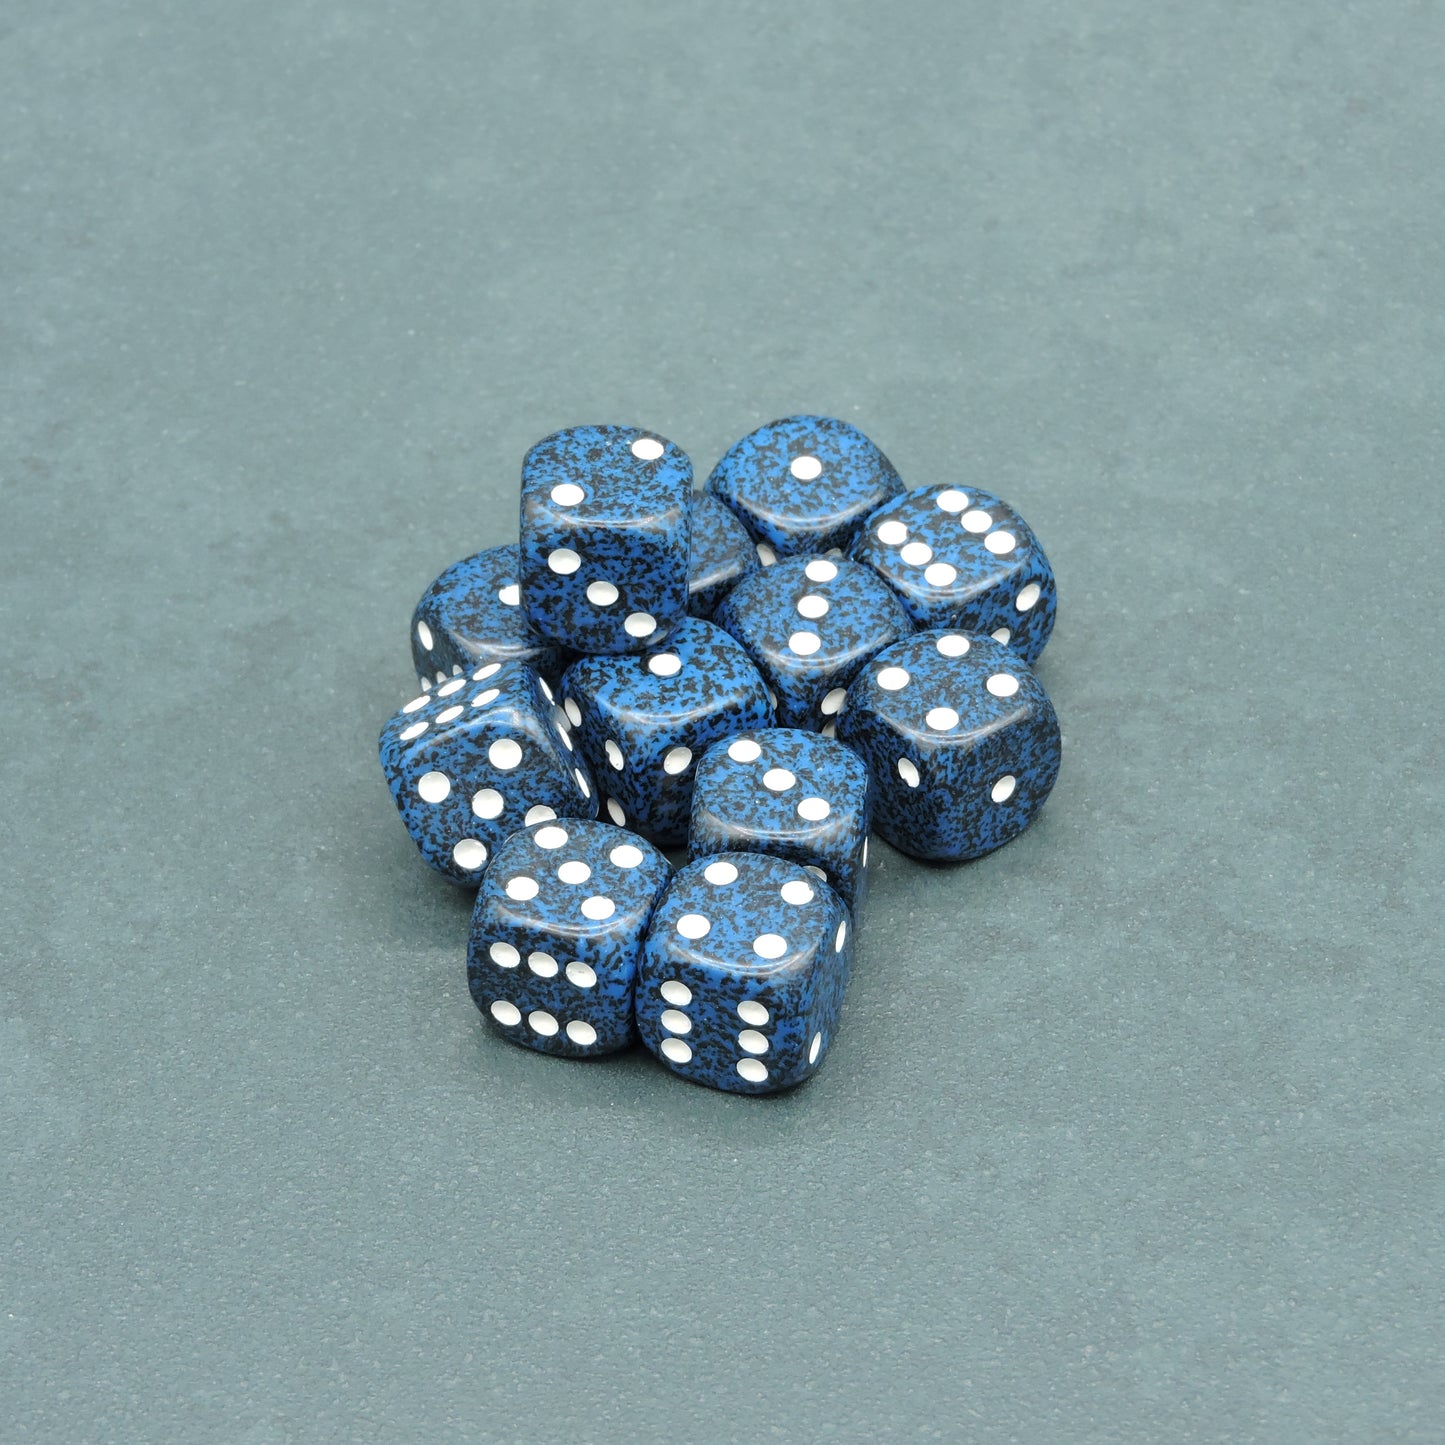 Stealth Speckled 16mm d6 Dice Block (12 dice)